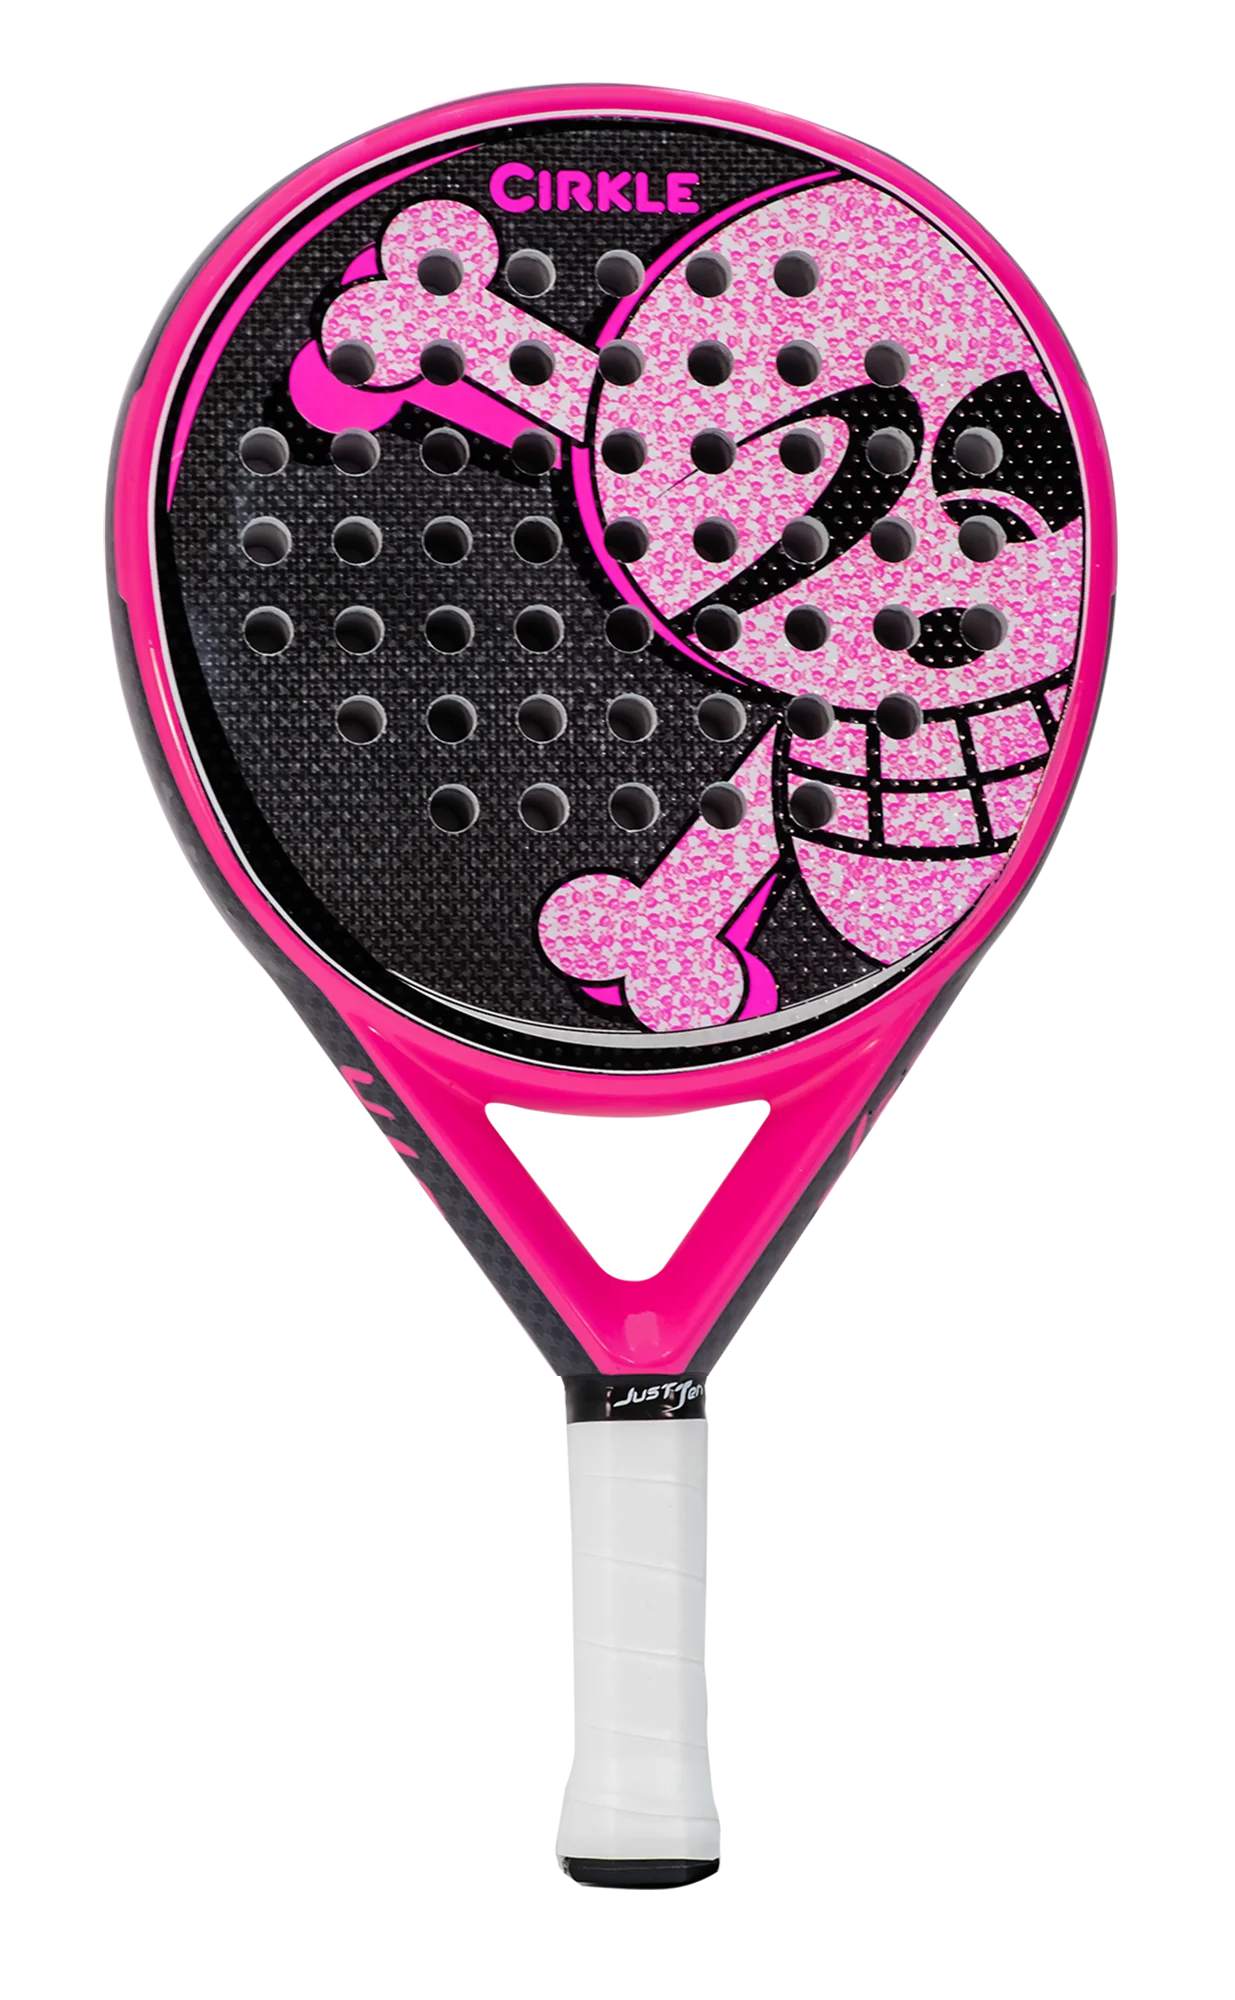 Akurate - The new French brand dedicated to Padel!